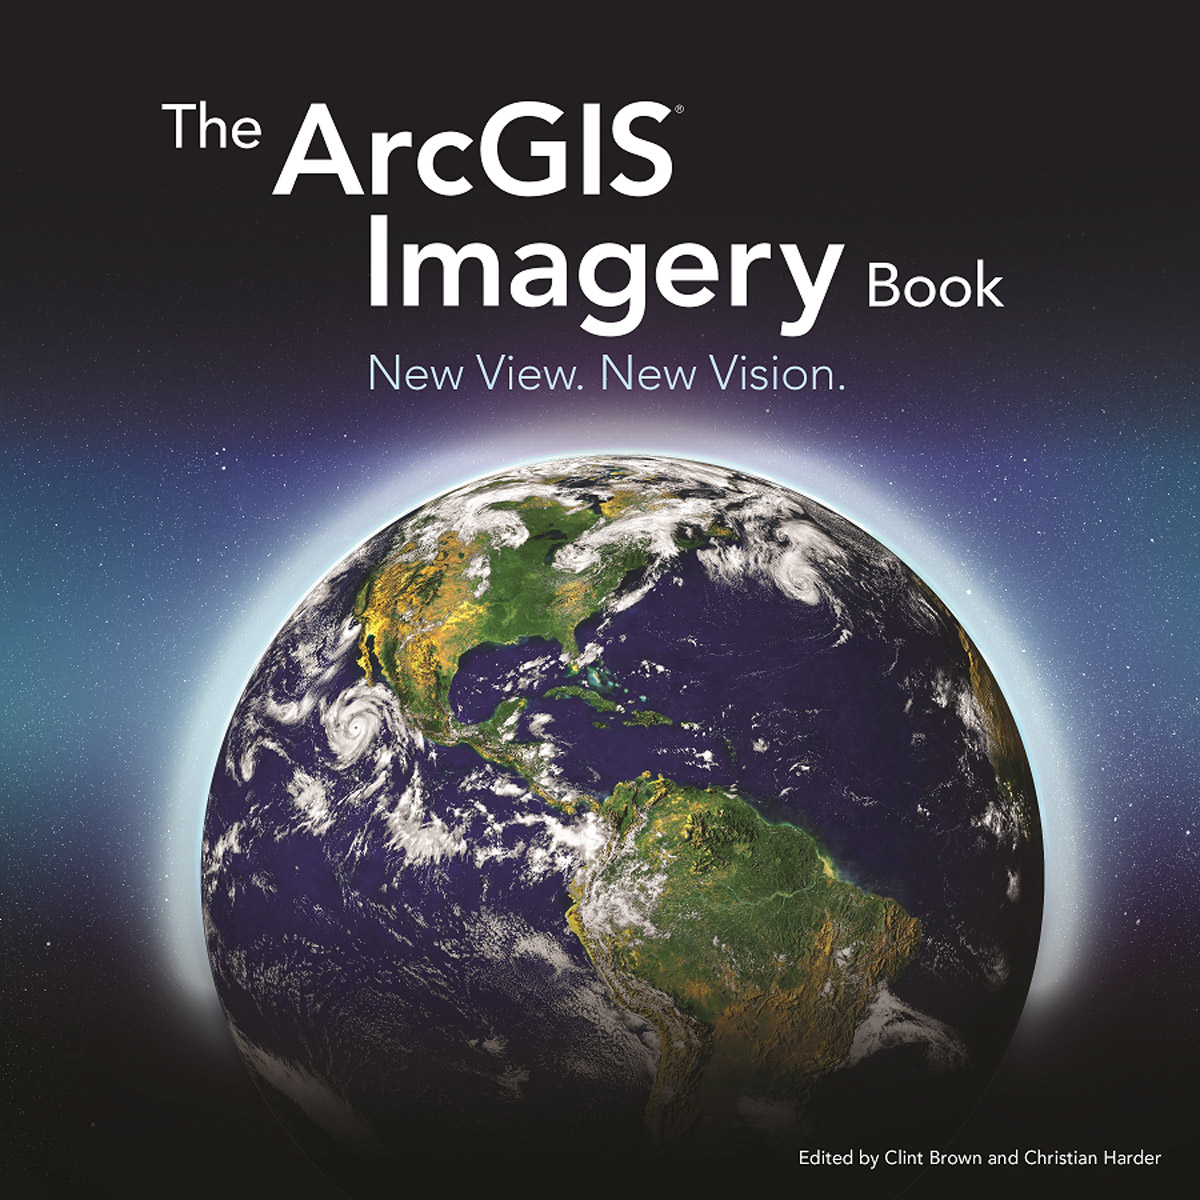 http://learn.arcgis.com/en/arcgis-imagery-book/chapter7